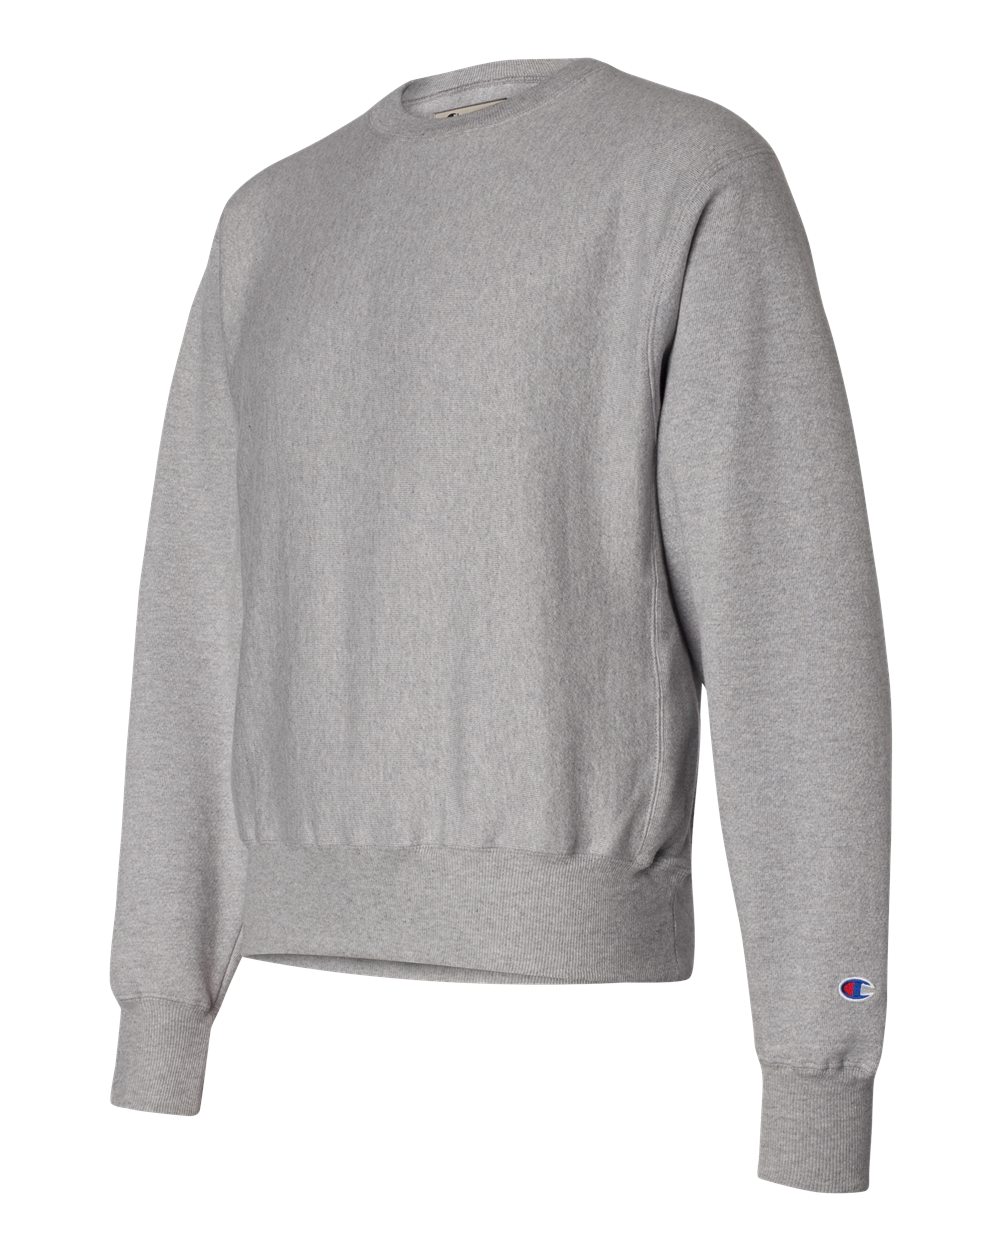 click to view Oxford Gray Heather